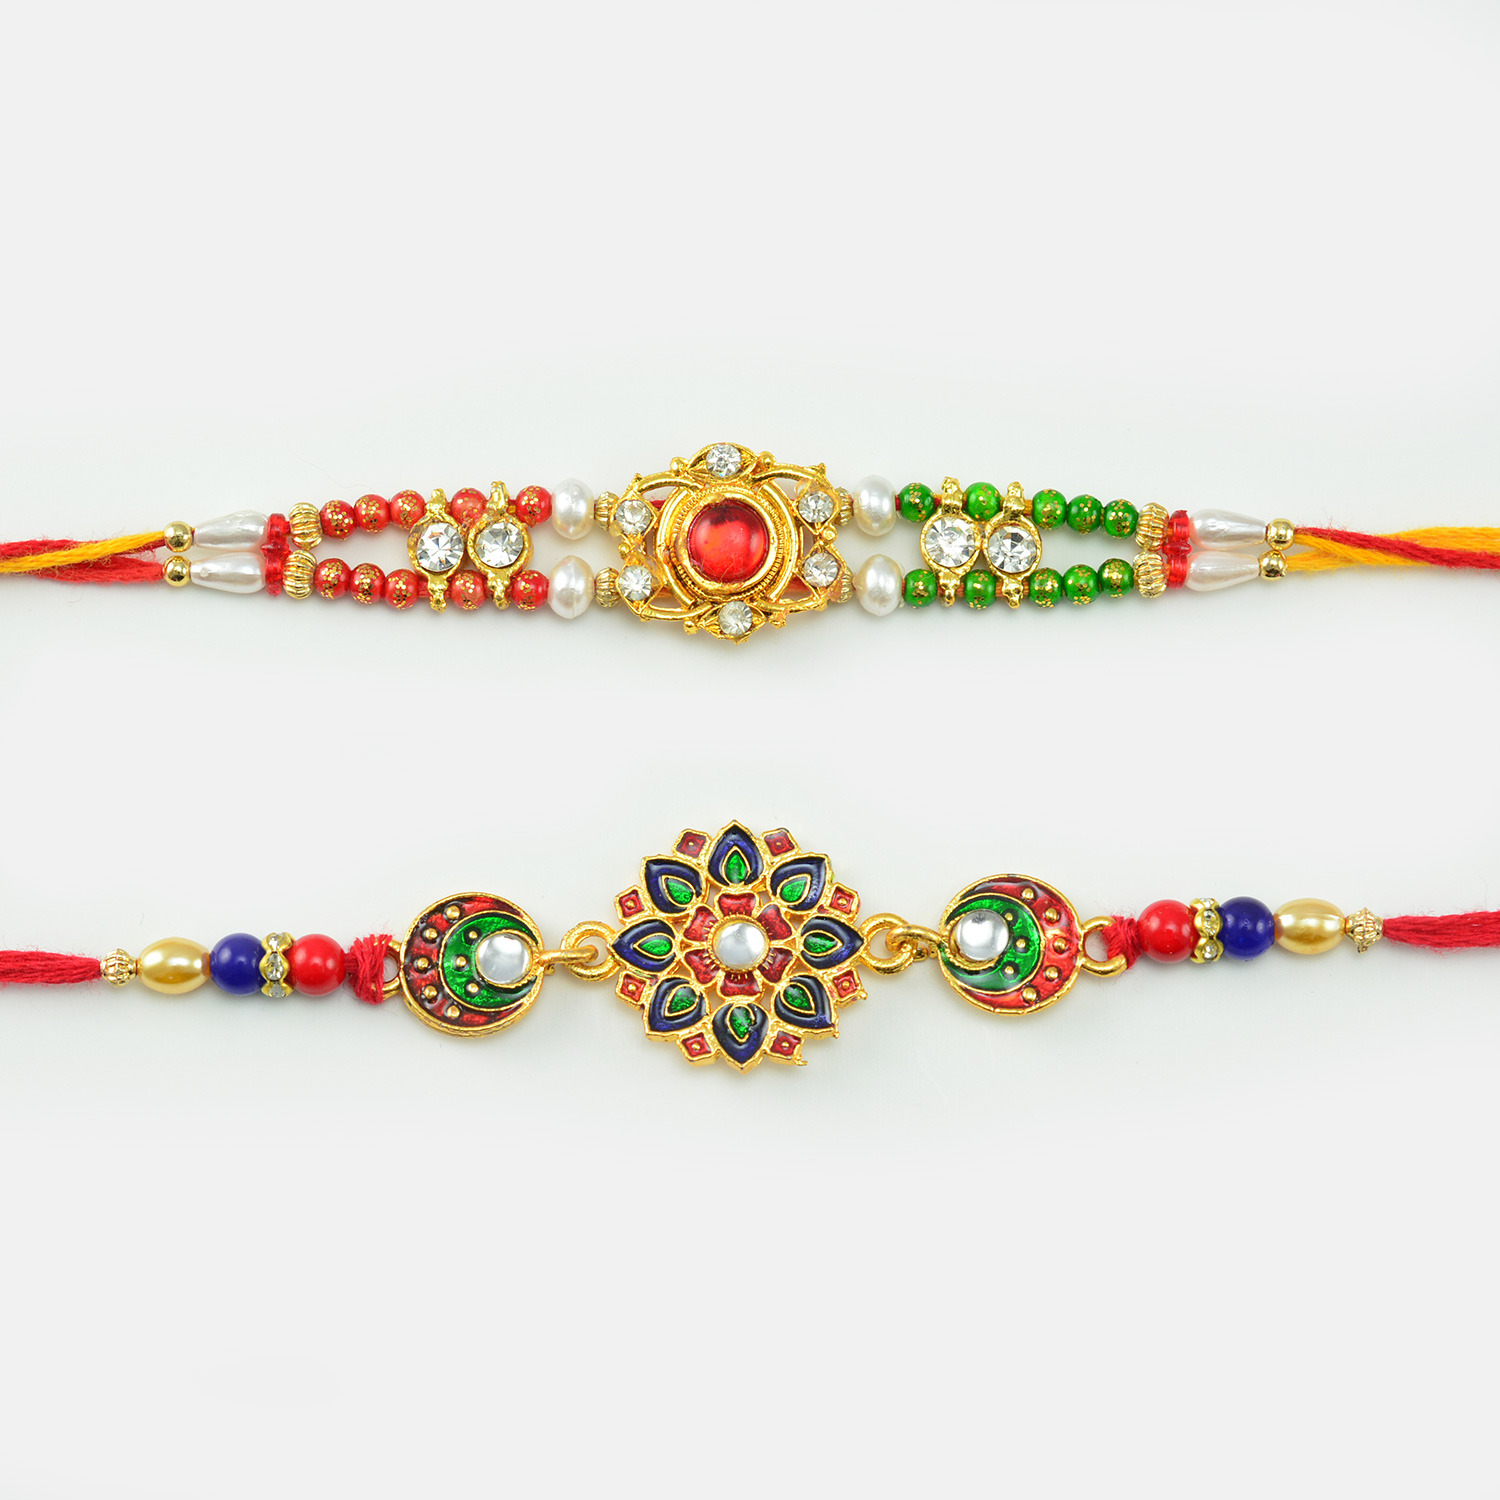 The Most Beautiful Rakhi Set As Pretty As Picture